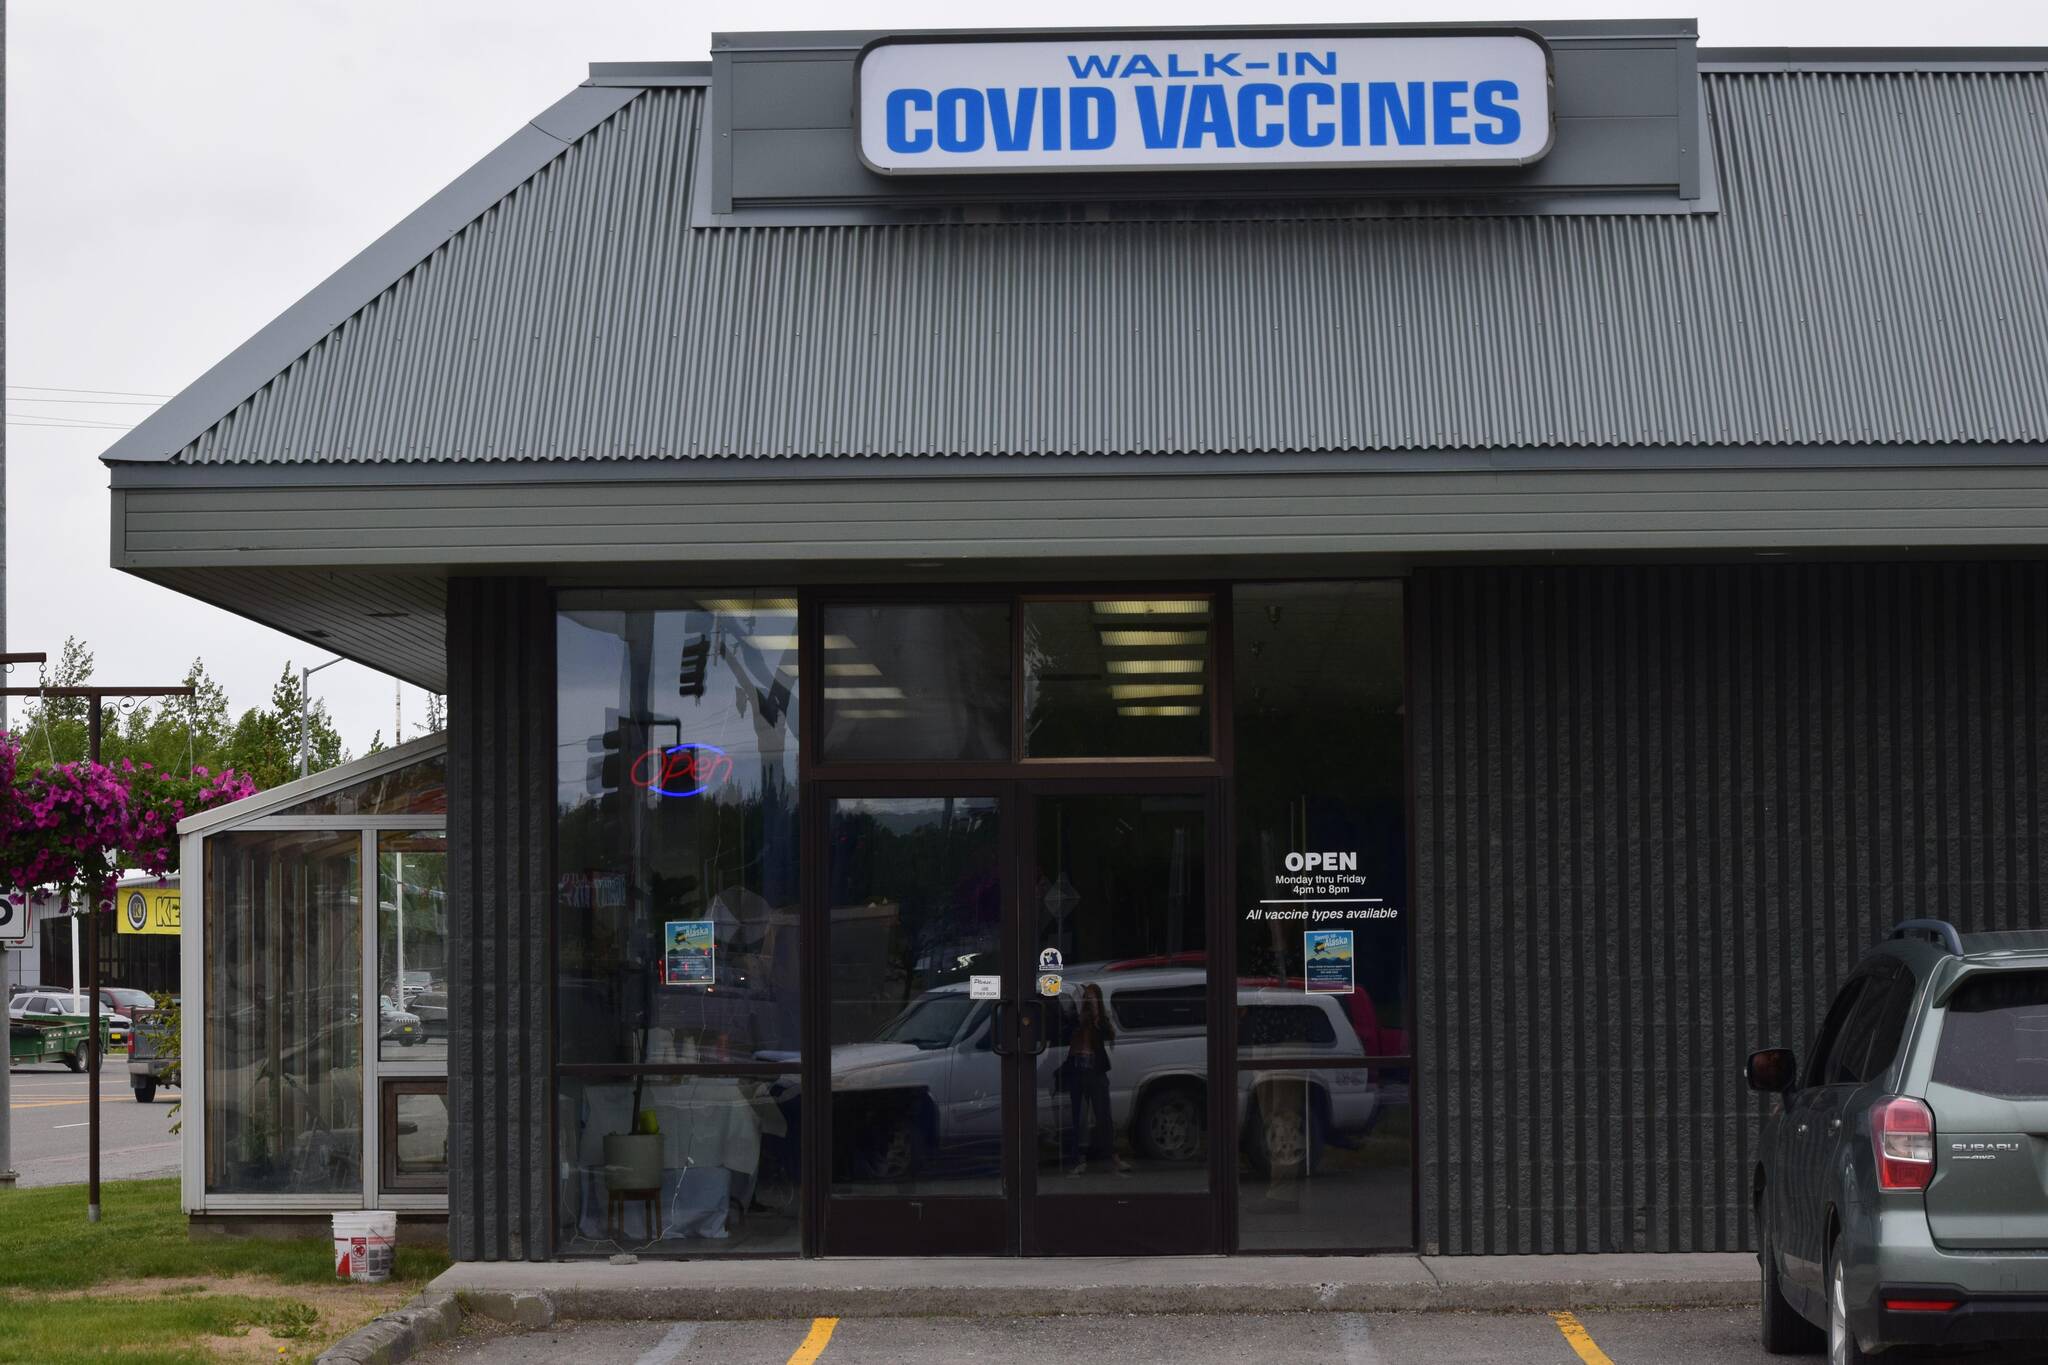 A clinic at the intersection of the Kenai Spur and Sterling Highways in Soldotna offers COVID-19 vaccines with no appointment necessary. (Camille Botello / Peninsula Clarion)